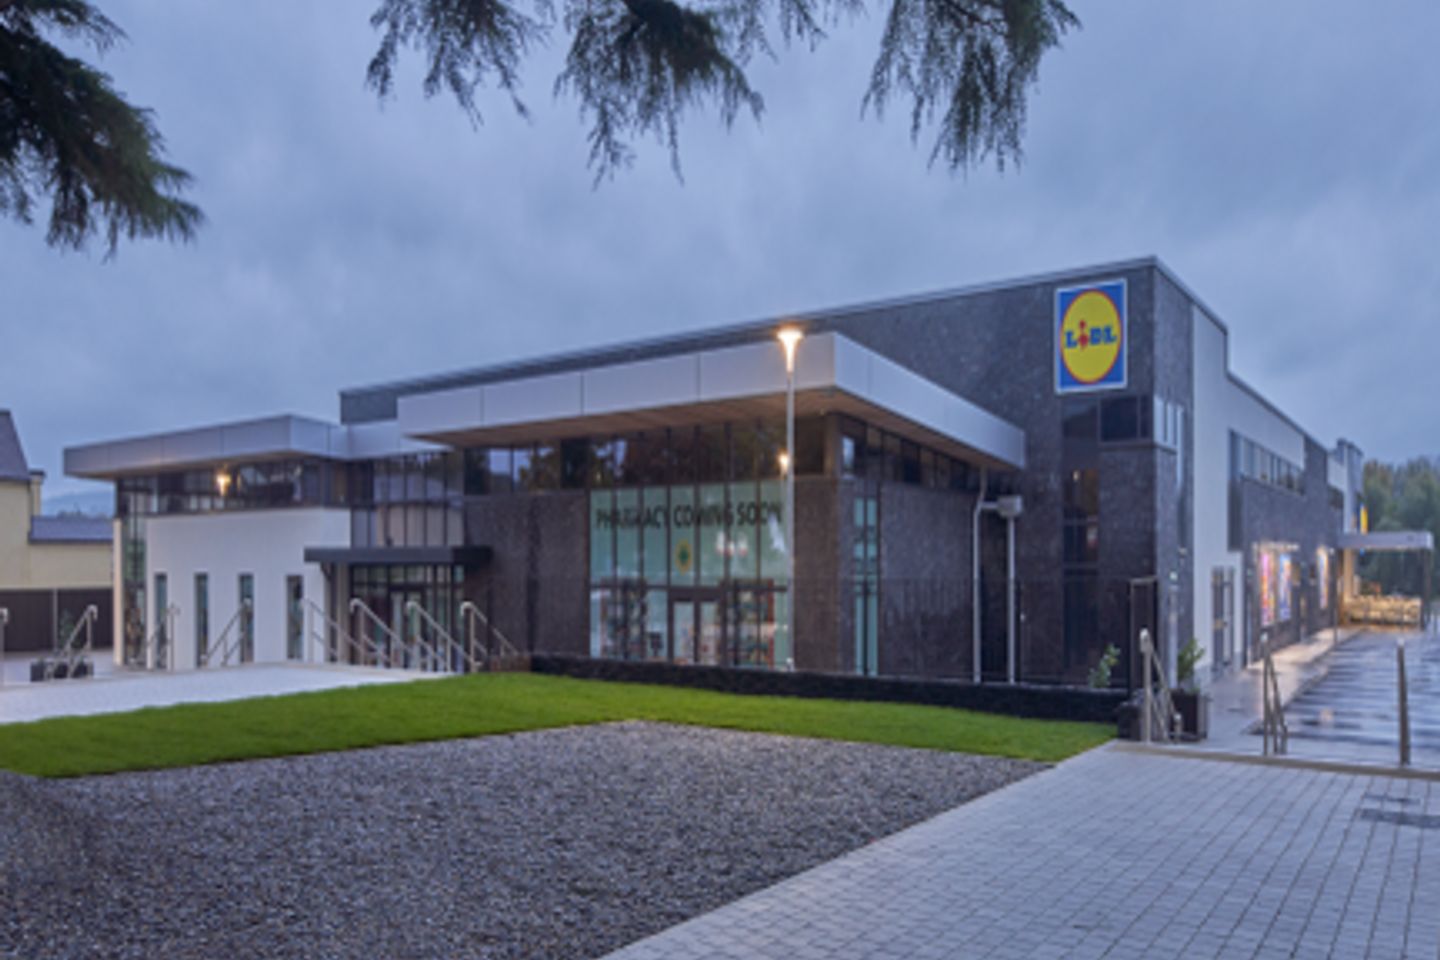 Lidl Store, Mallow, Co. Cork